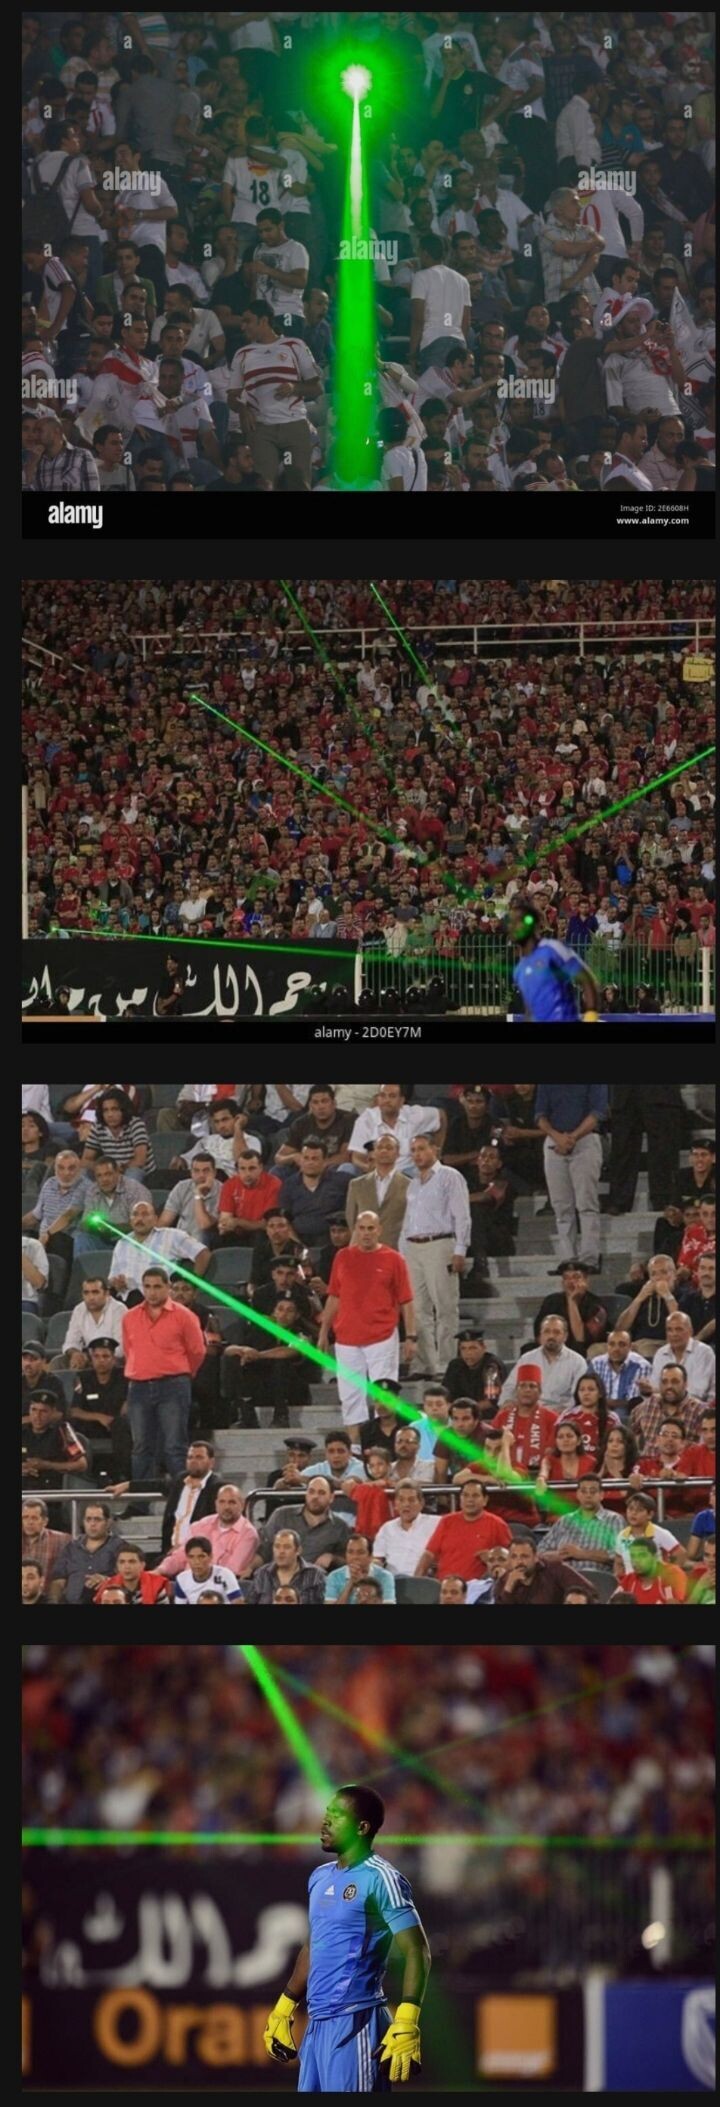 The reason why the Egyptian soccer team didn't react to the laser attack.